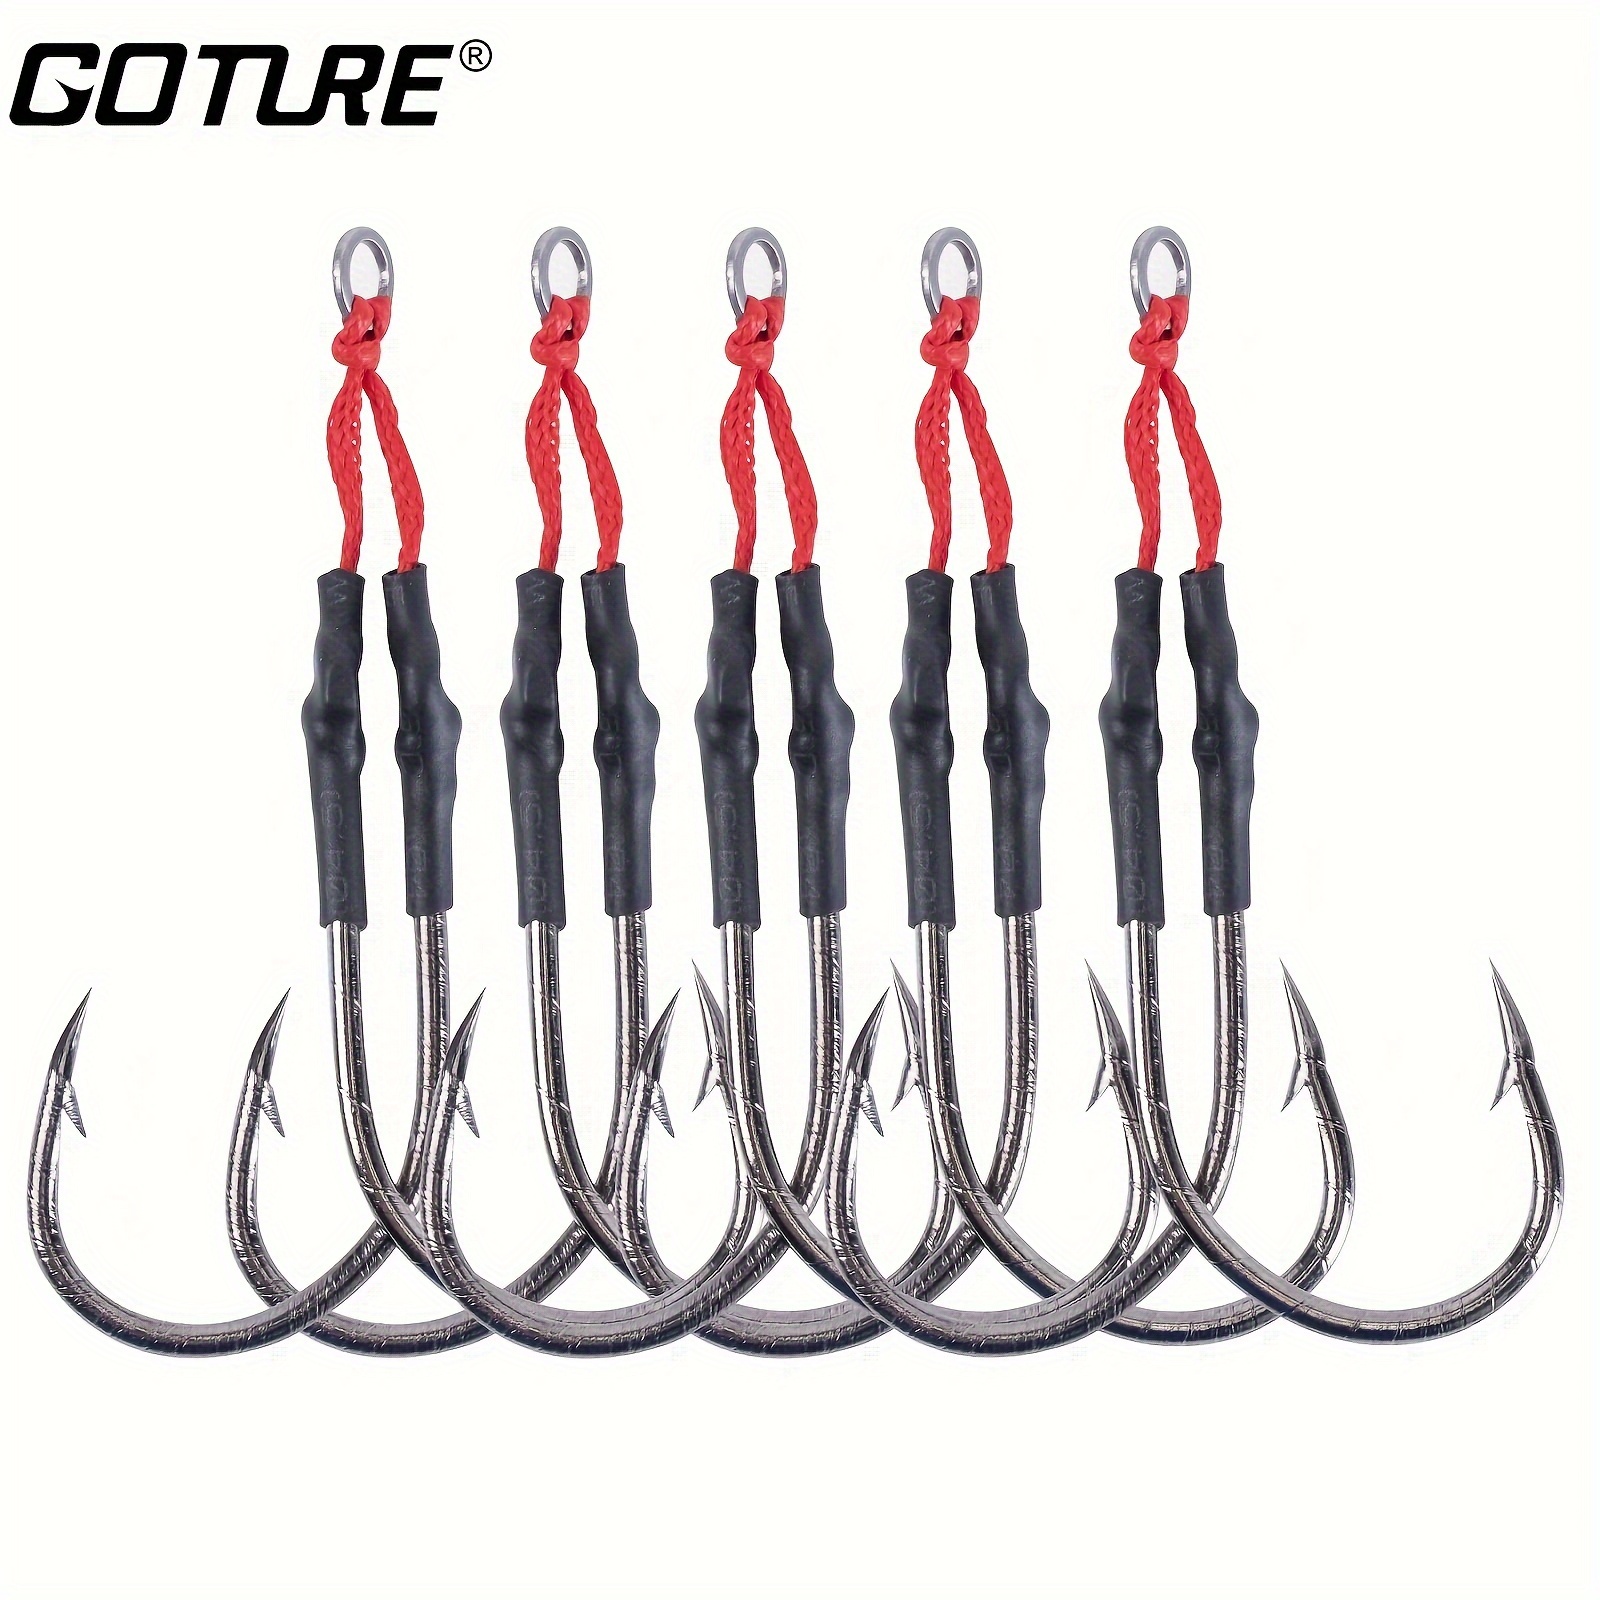  Fishing Assist Hooks Saltwater Dancing Stinger Jigging Hooks  Double Assist Replacement Fishing Hooks For Slow Pitch Jigs Vertical  Jigging Lures Blue-#1/0-5pcs